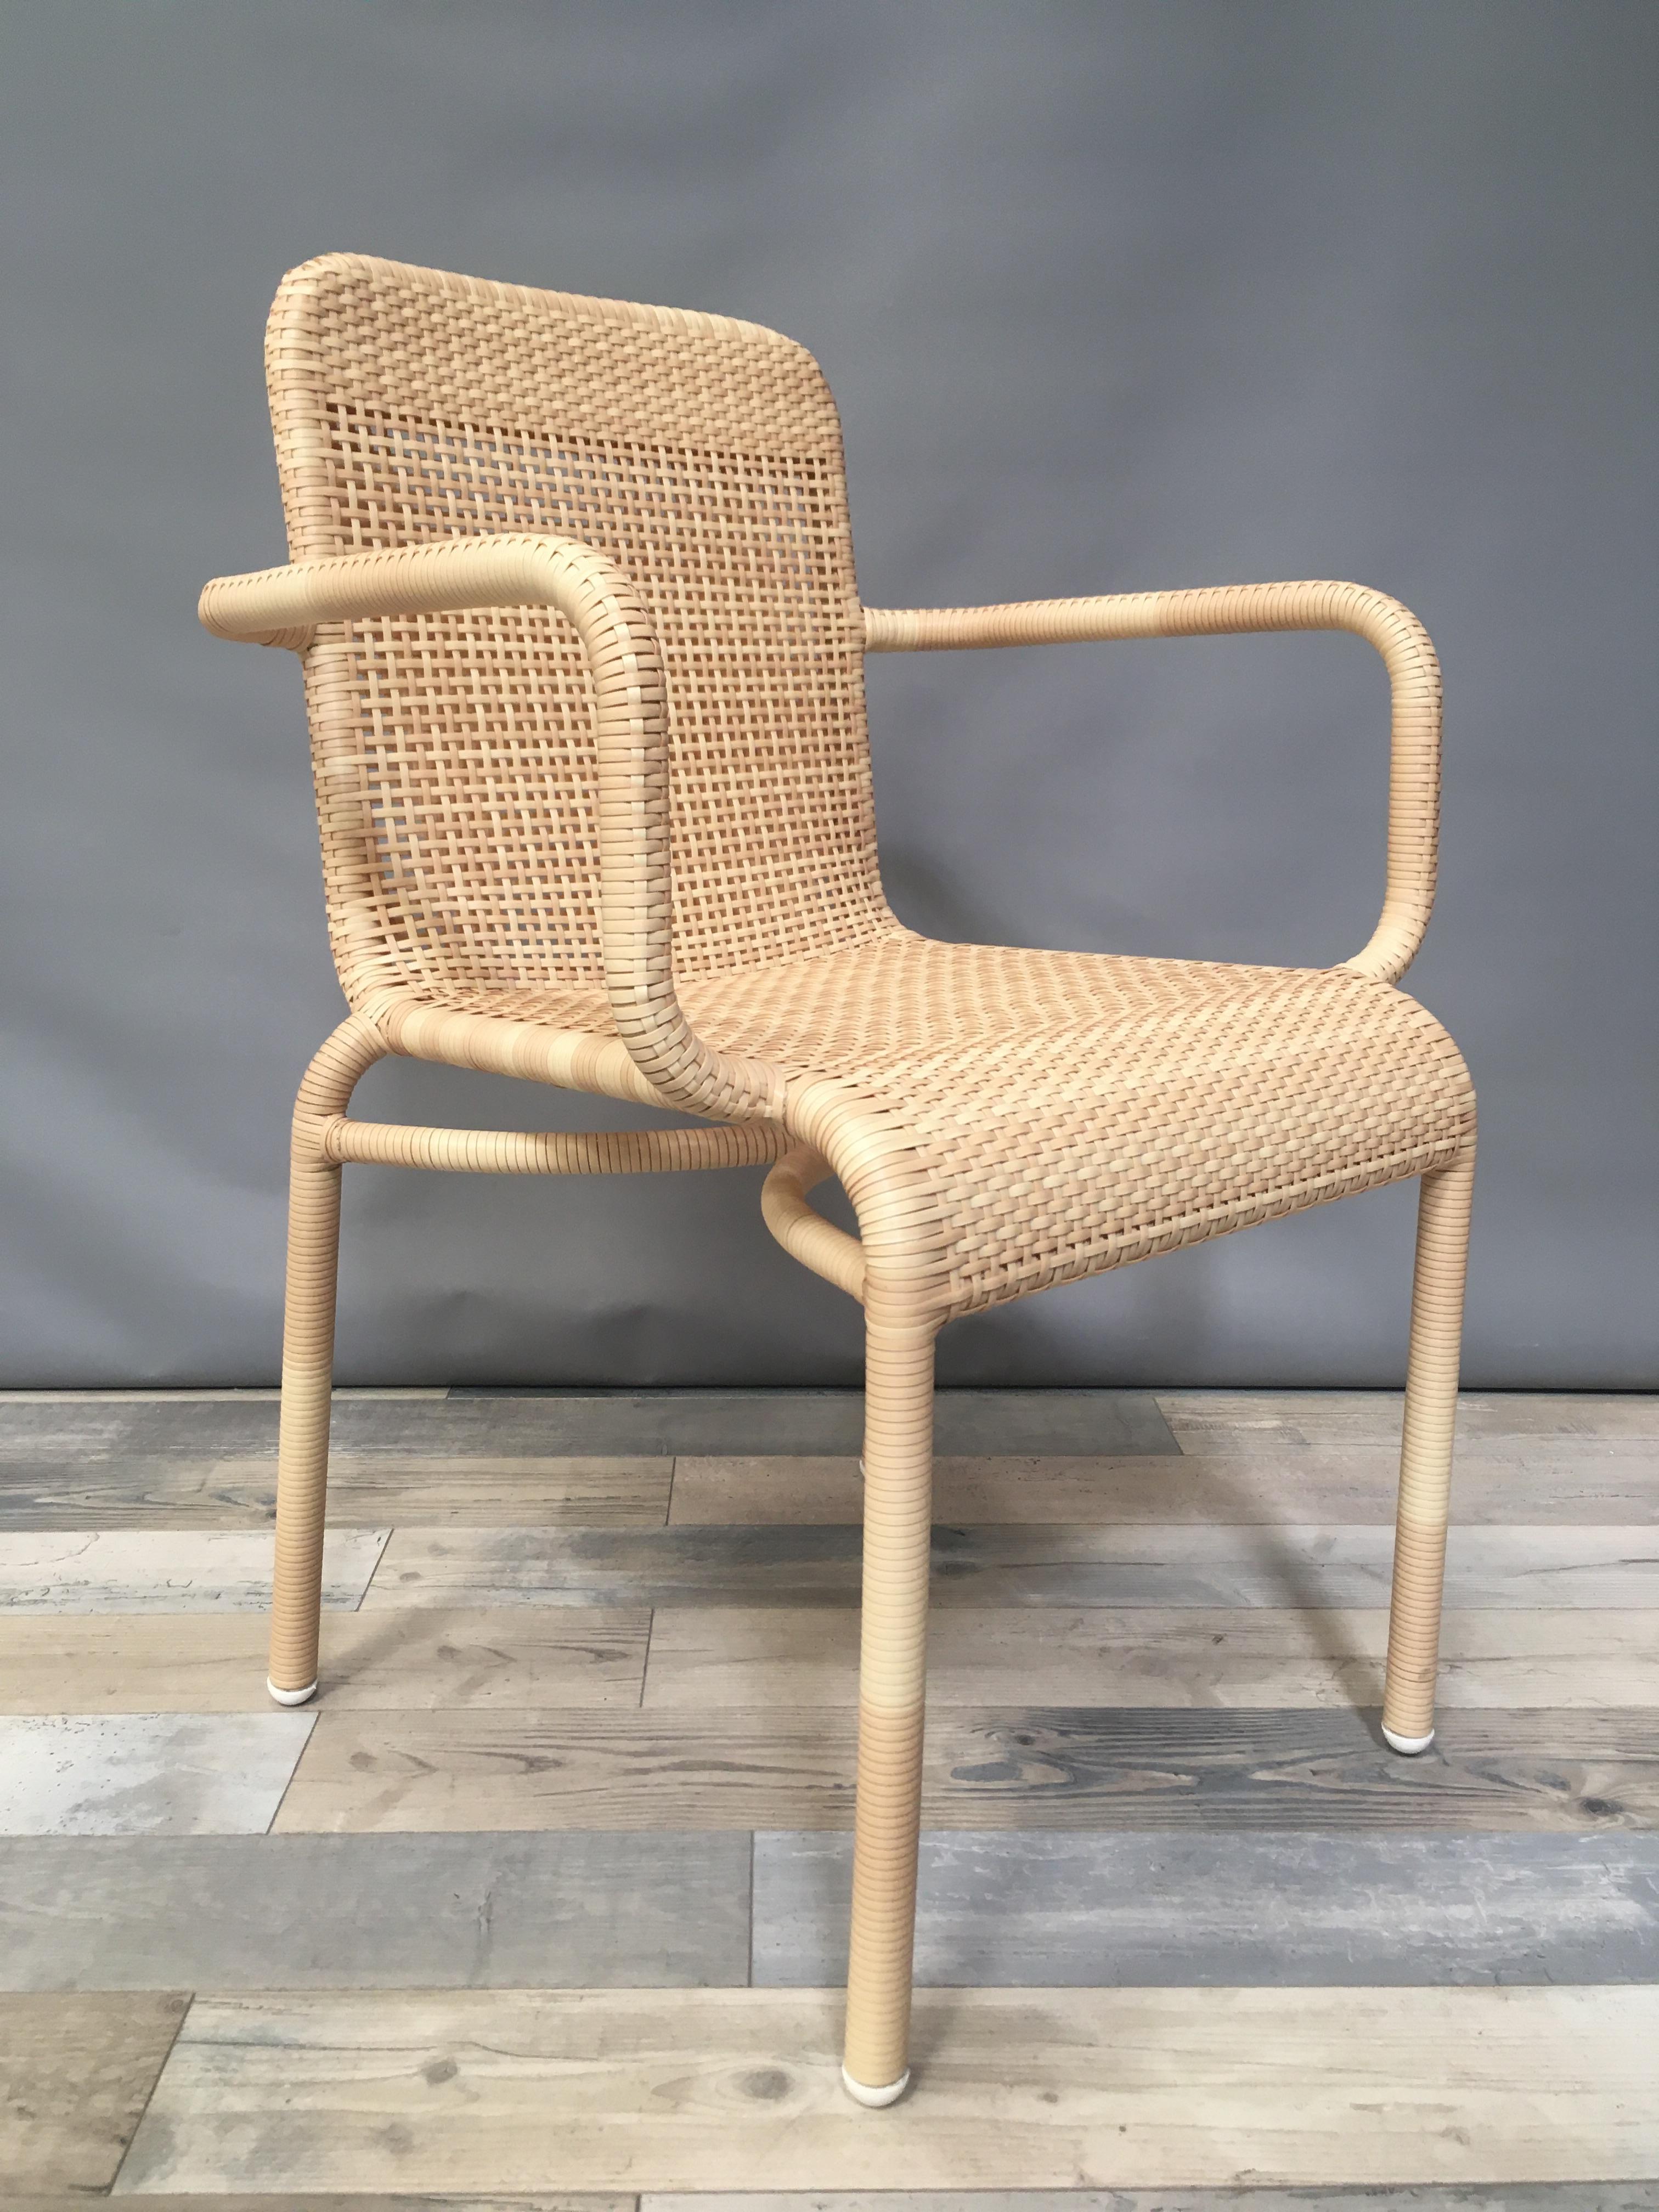 French Design and Braided Resin Rattan Effect Outdoor Chair For Sale 3